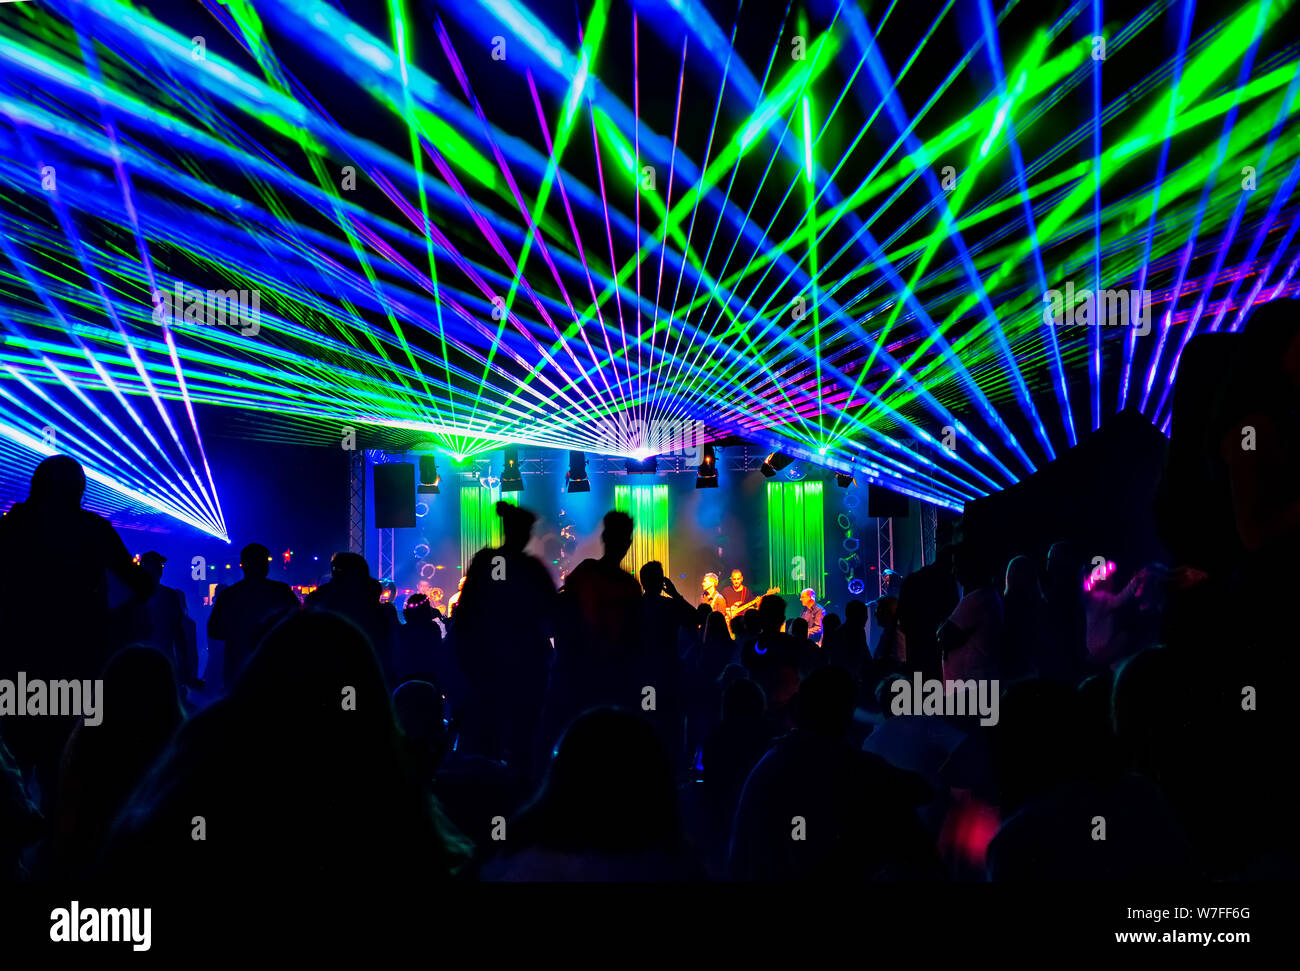 Laubach, Germany, 08/03/2019: Laser show, Luxury entertainment with audience silhouettes in nightclub event, festival or New Year Stock Photo